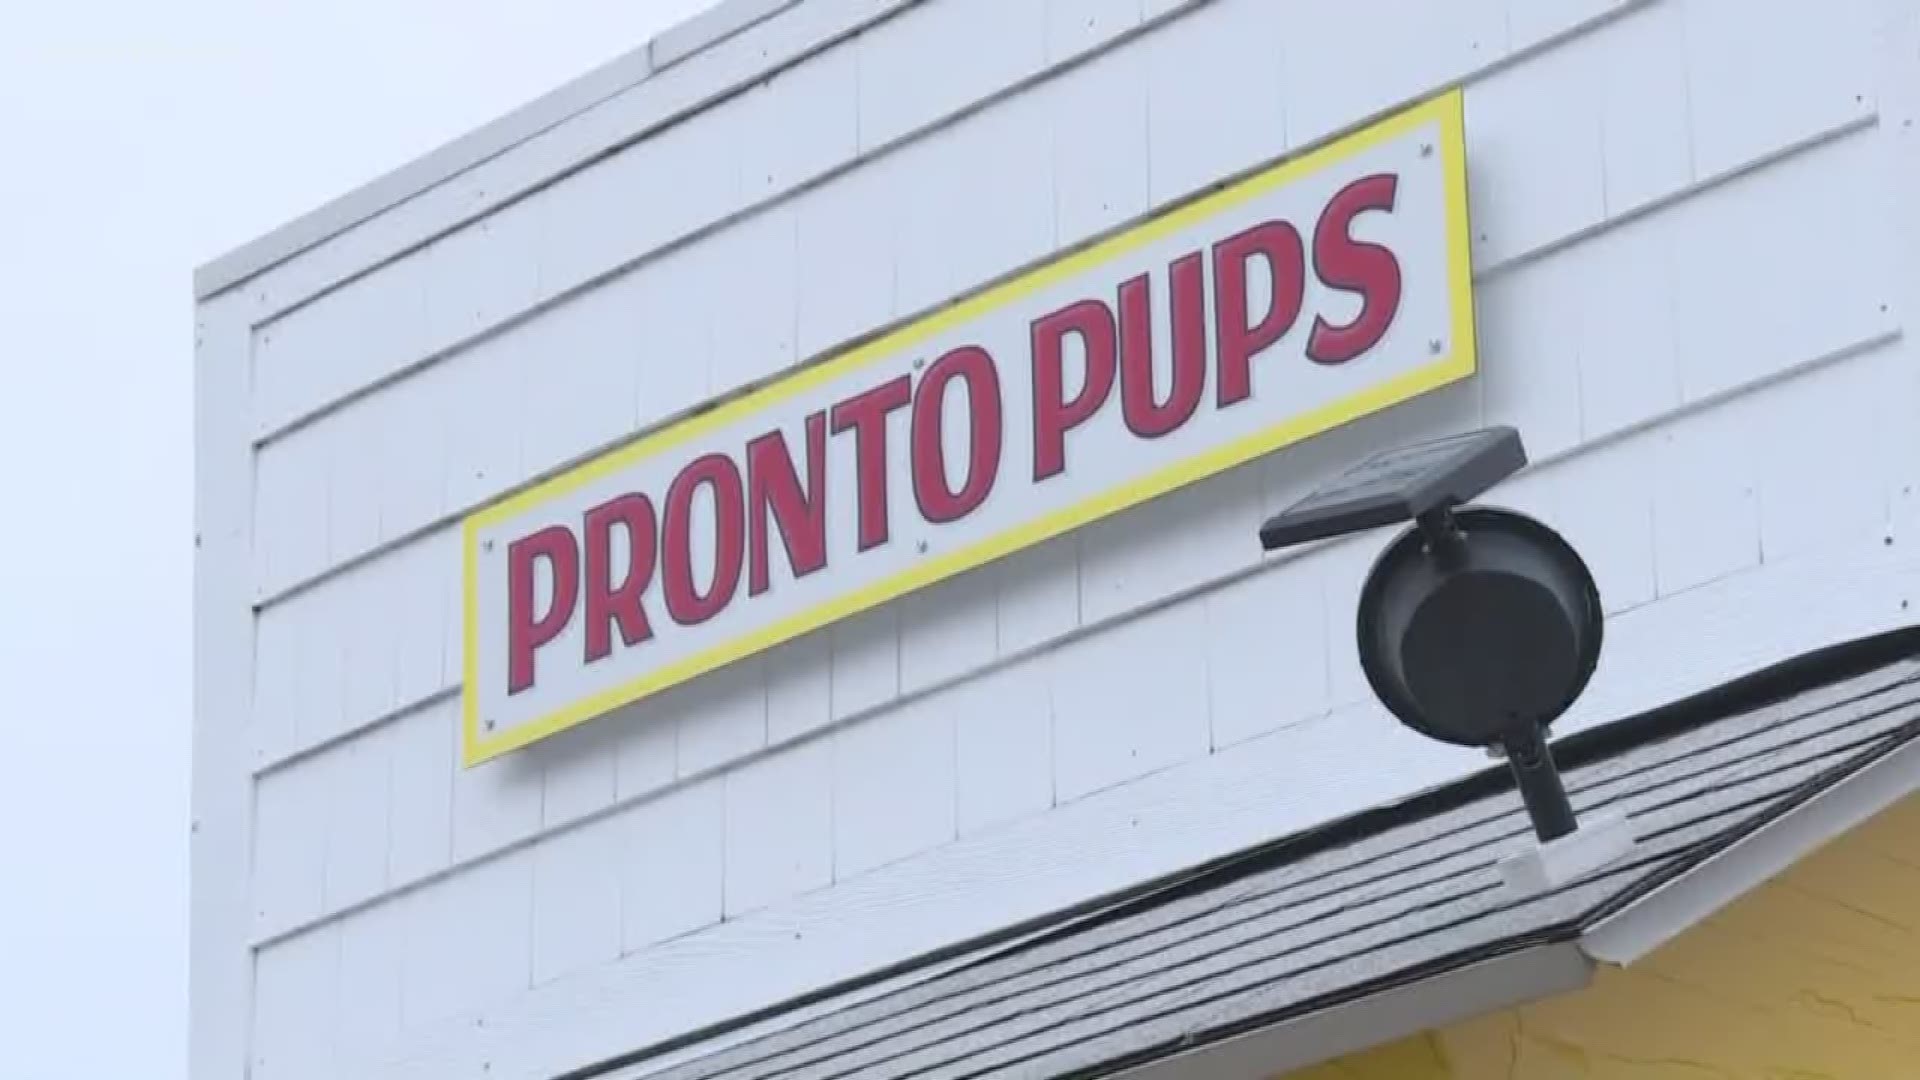 Pronto Pup reactivates Facebook, owner issues apology